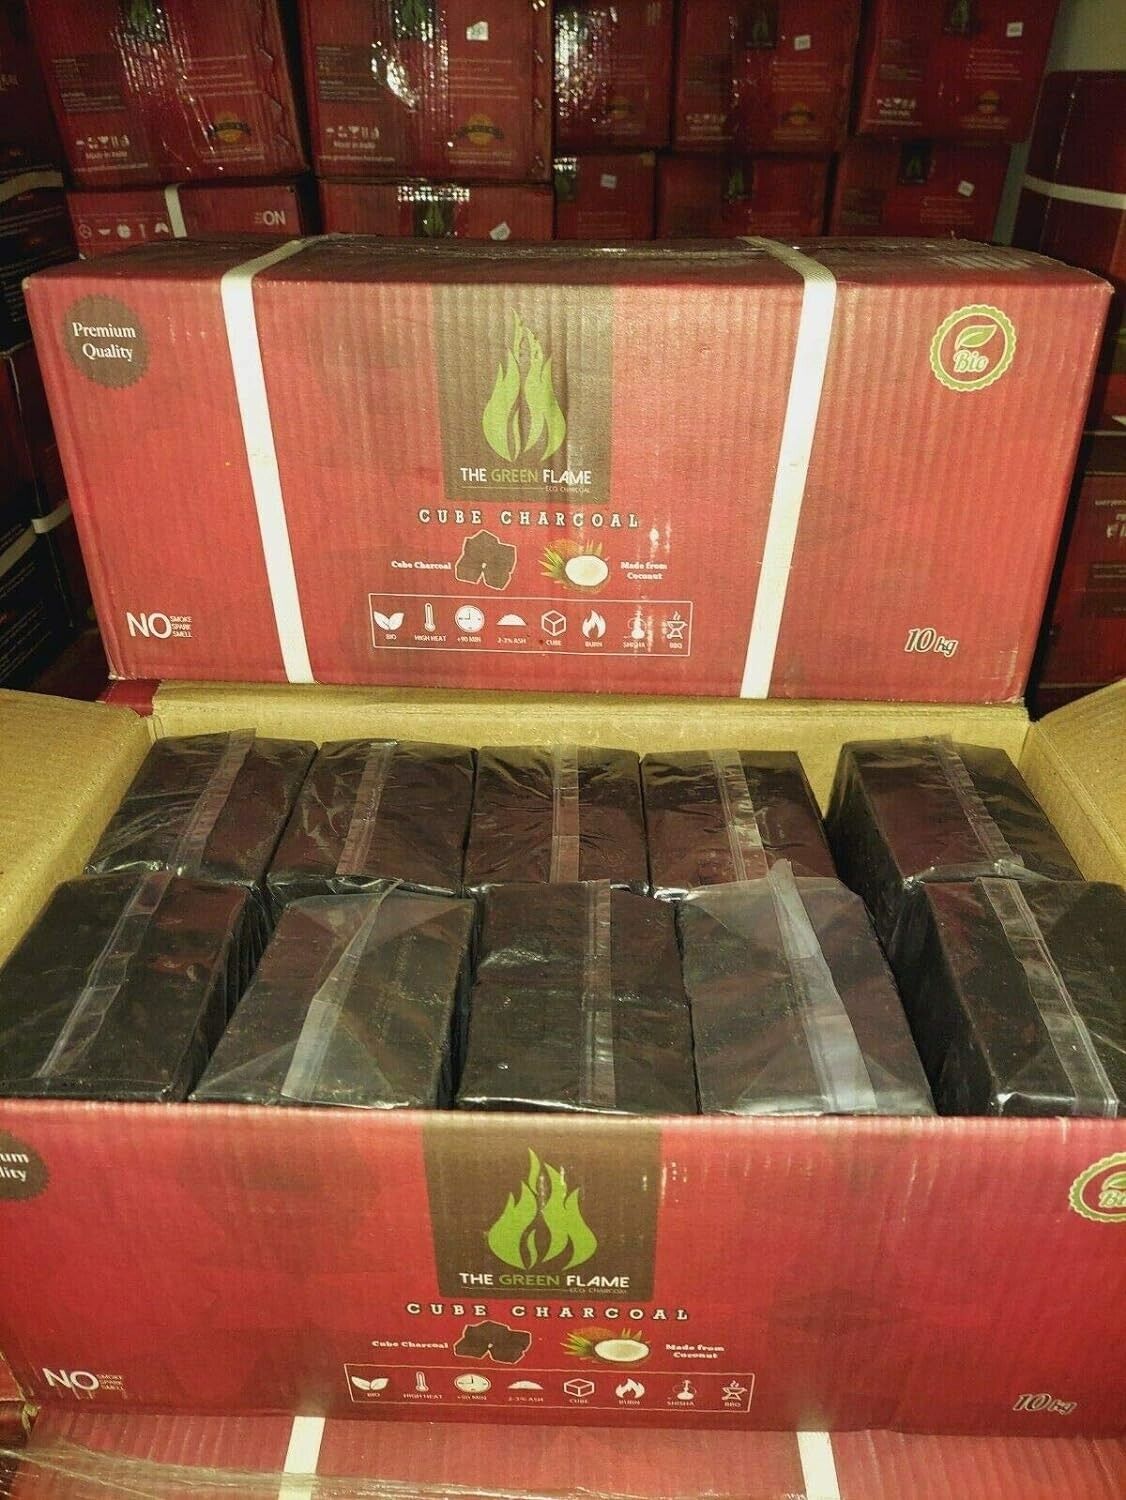  the green flame 10kg Bulk Hookah Charcoal Cubes 720 pcs coconut SHIP FROM US 